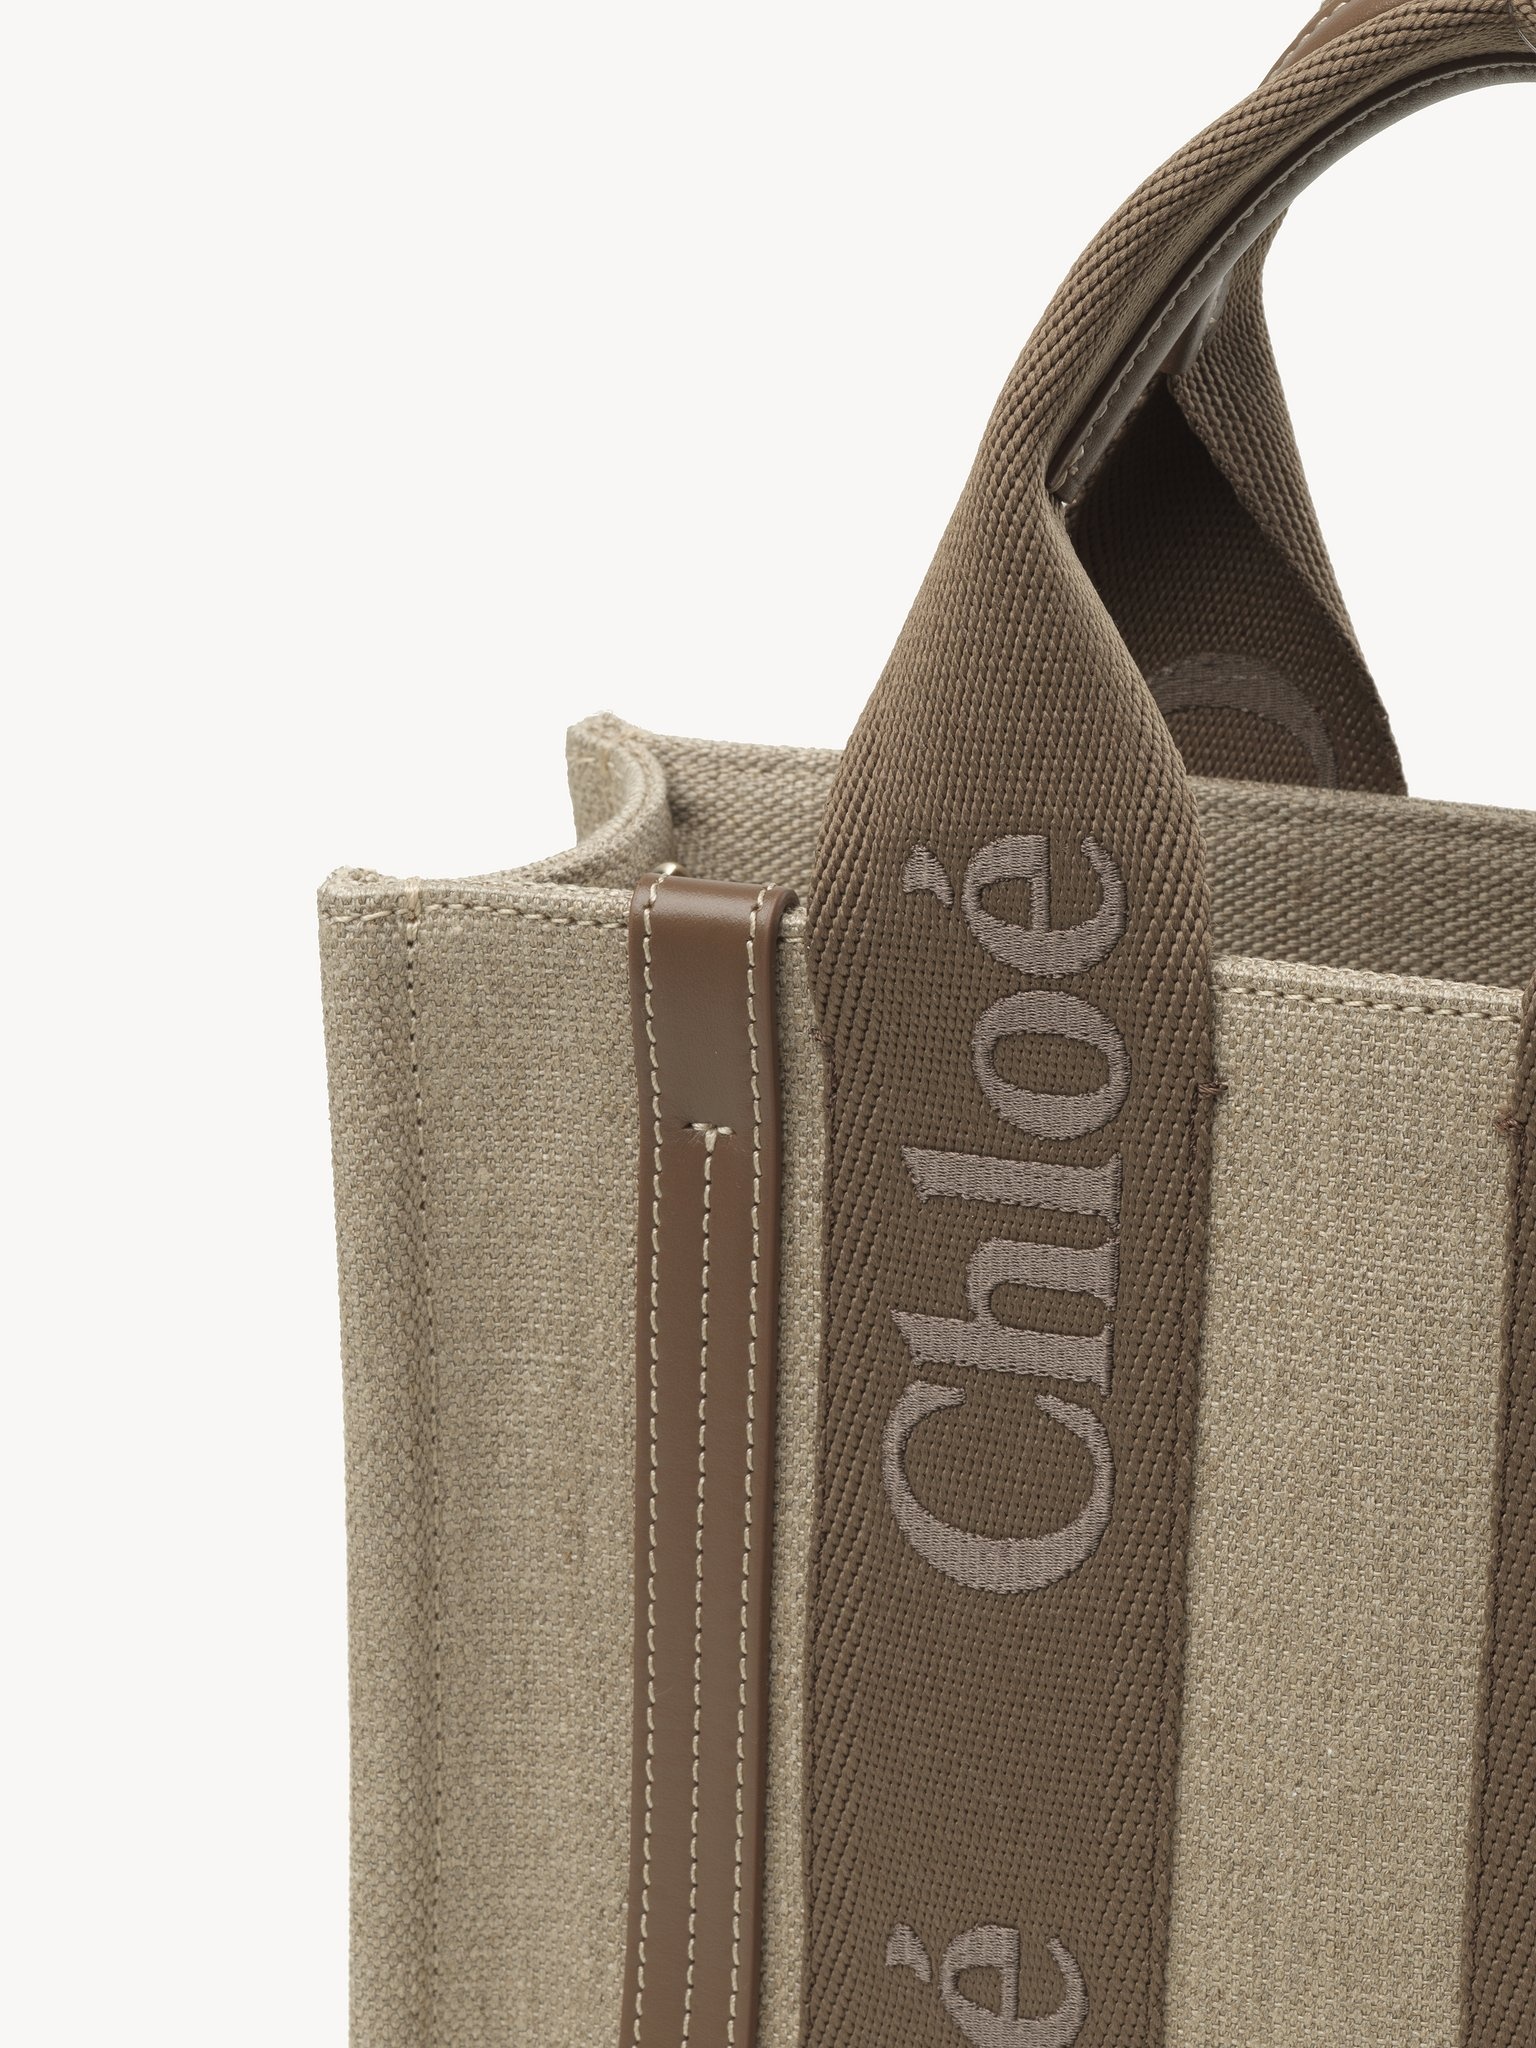 SMALL WOODY TOTE BAG IN LINEN - 6